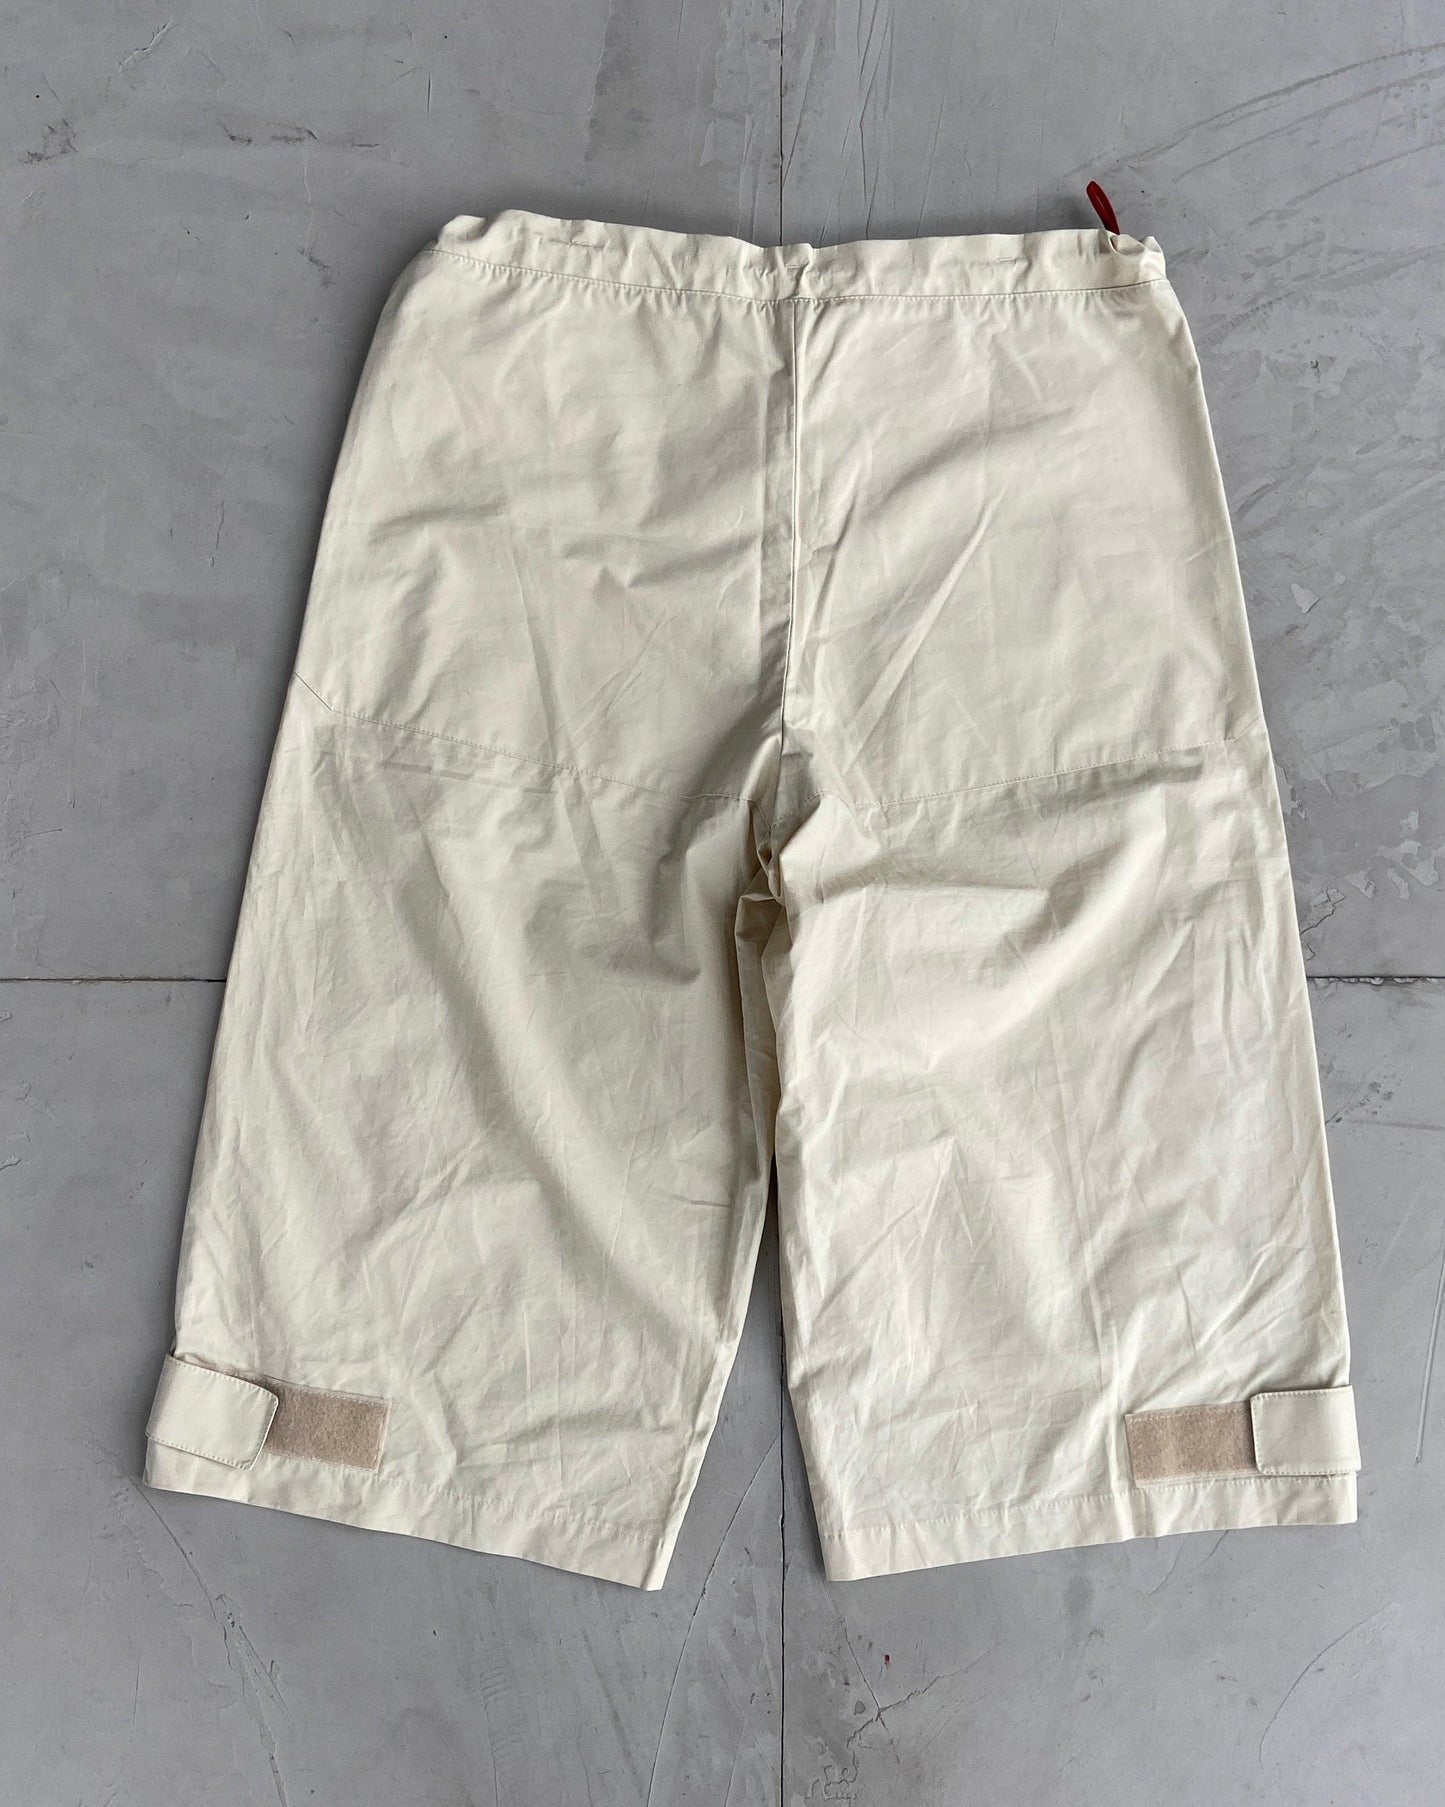 PRADA SPORT 2000'S OVER-KNEE LONG SHORTS - M - Known Source